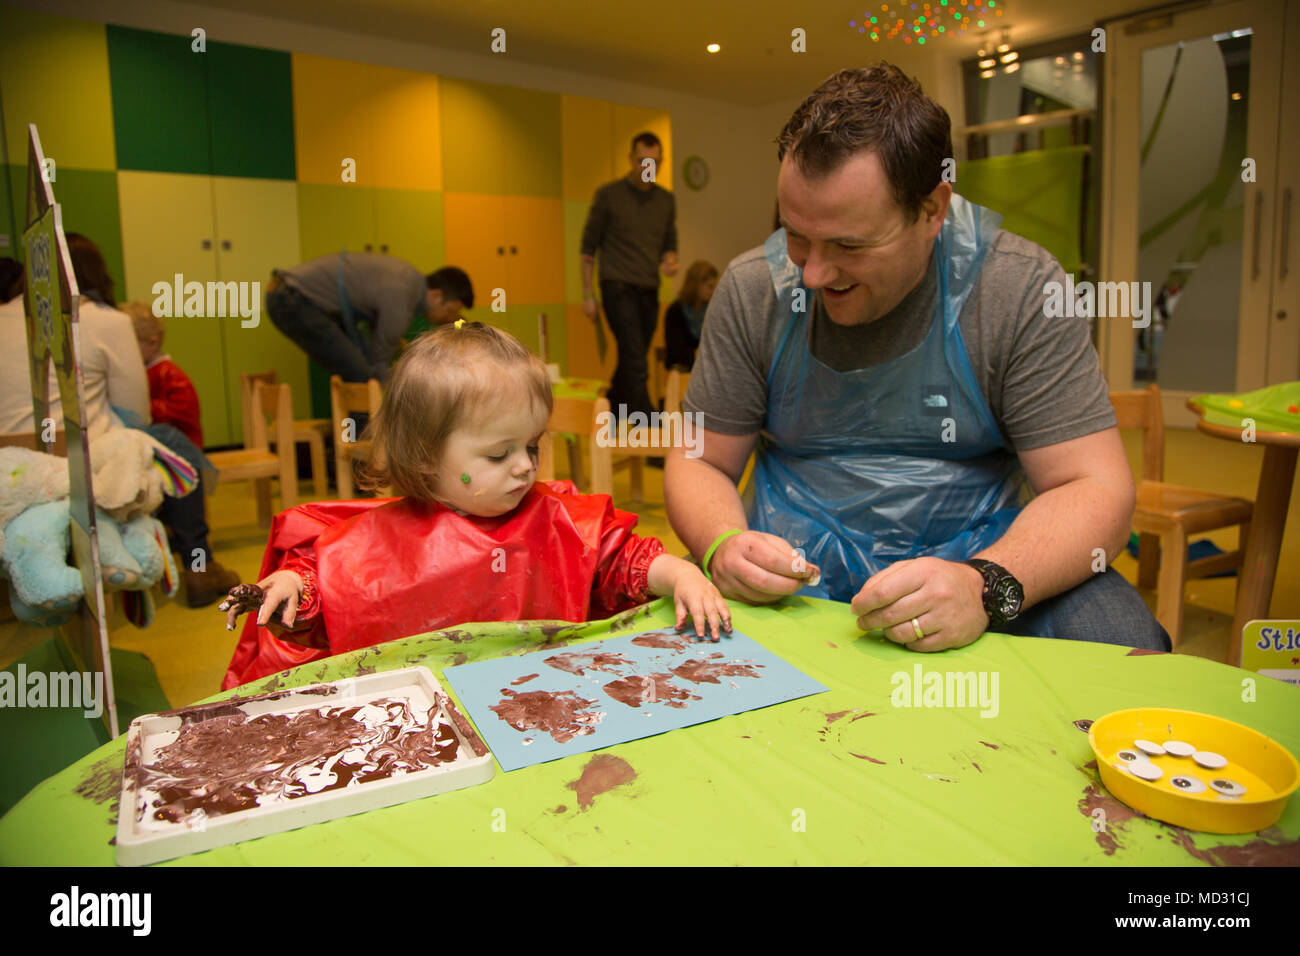 Father and daughter at messy play Stock Photo